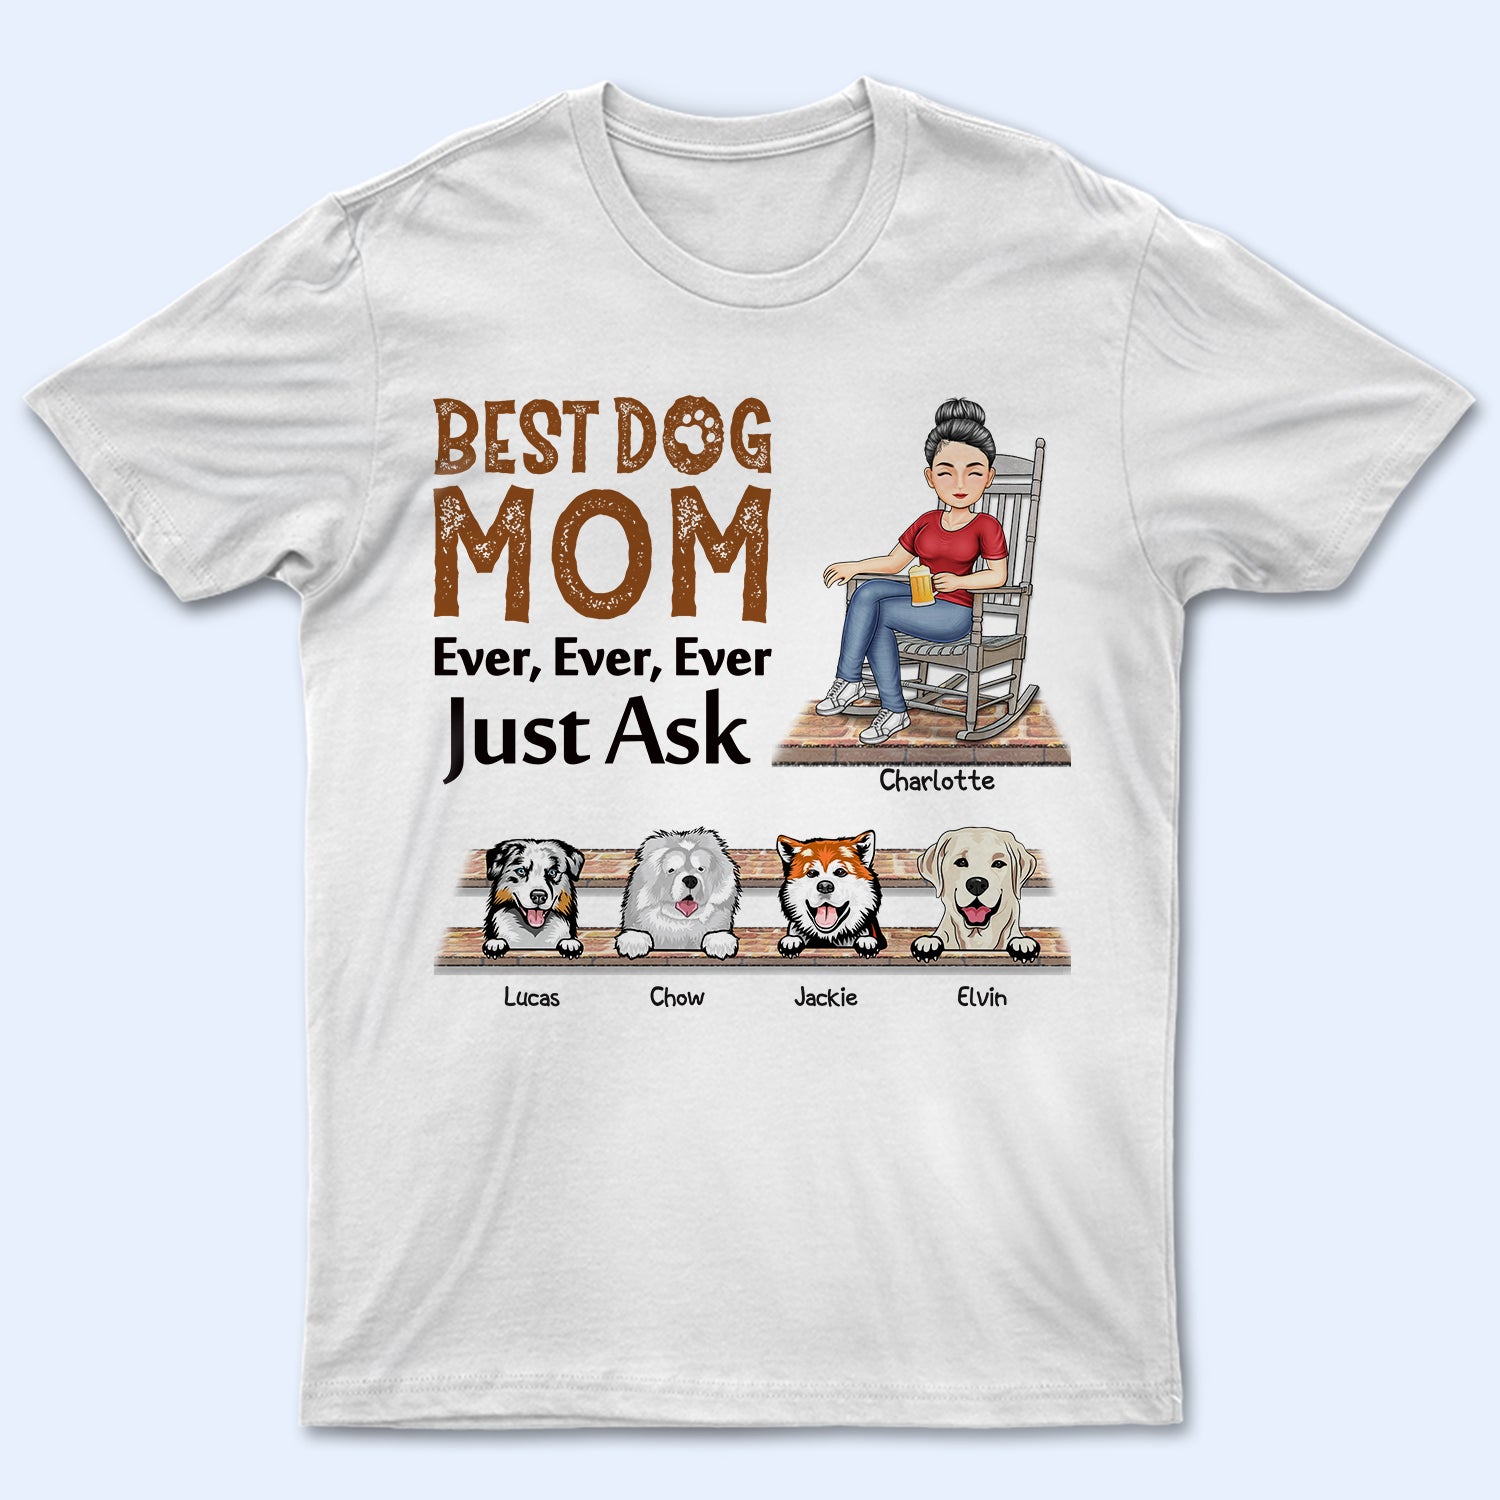 Best Dog Cat Mom Ever Ever Ever Just Ask - Birthday, Loving Gift For Yourself, Women, Mom, Mother, Pet Lovers - Personalized Custom T Shirt